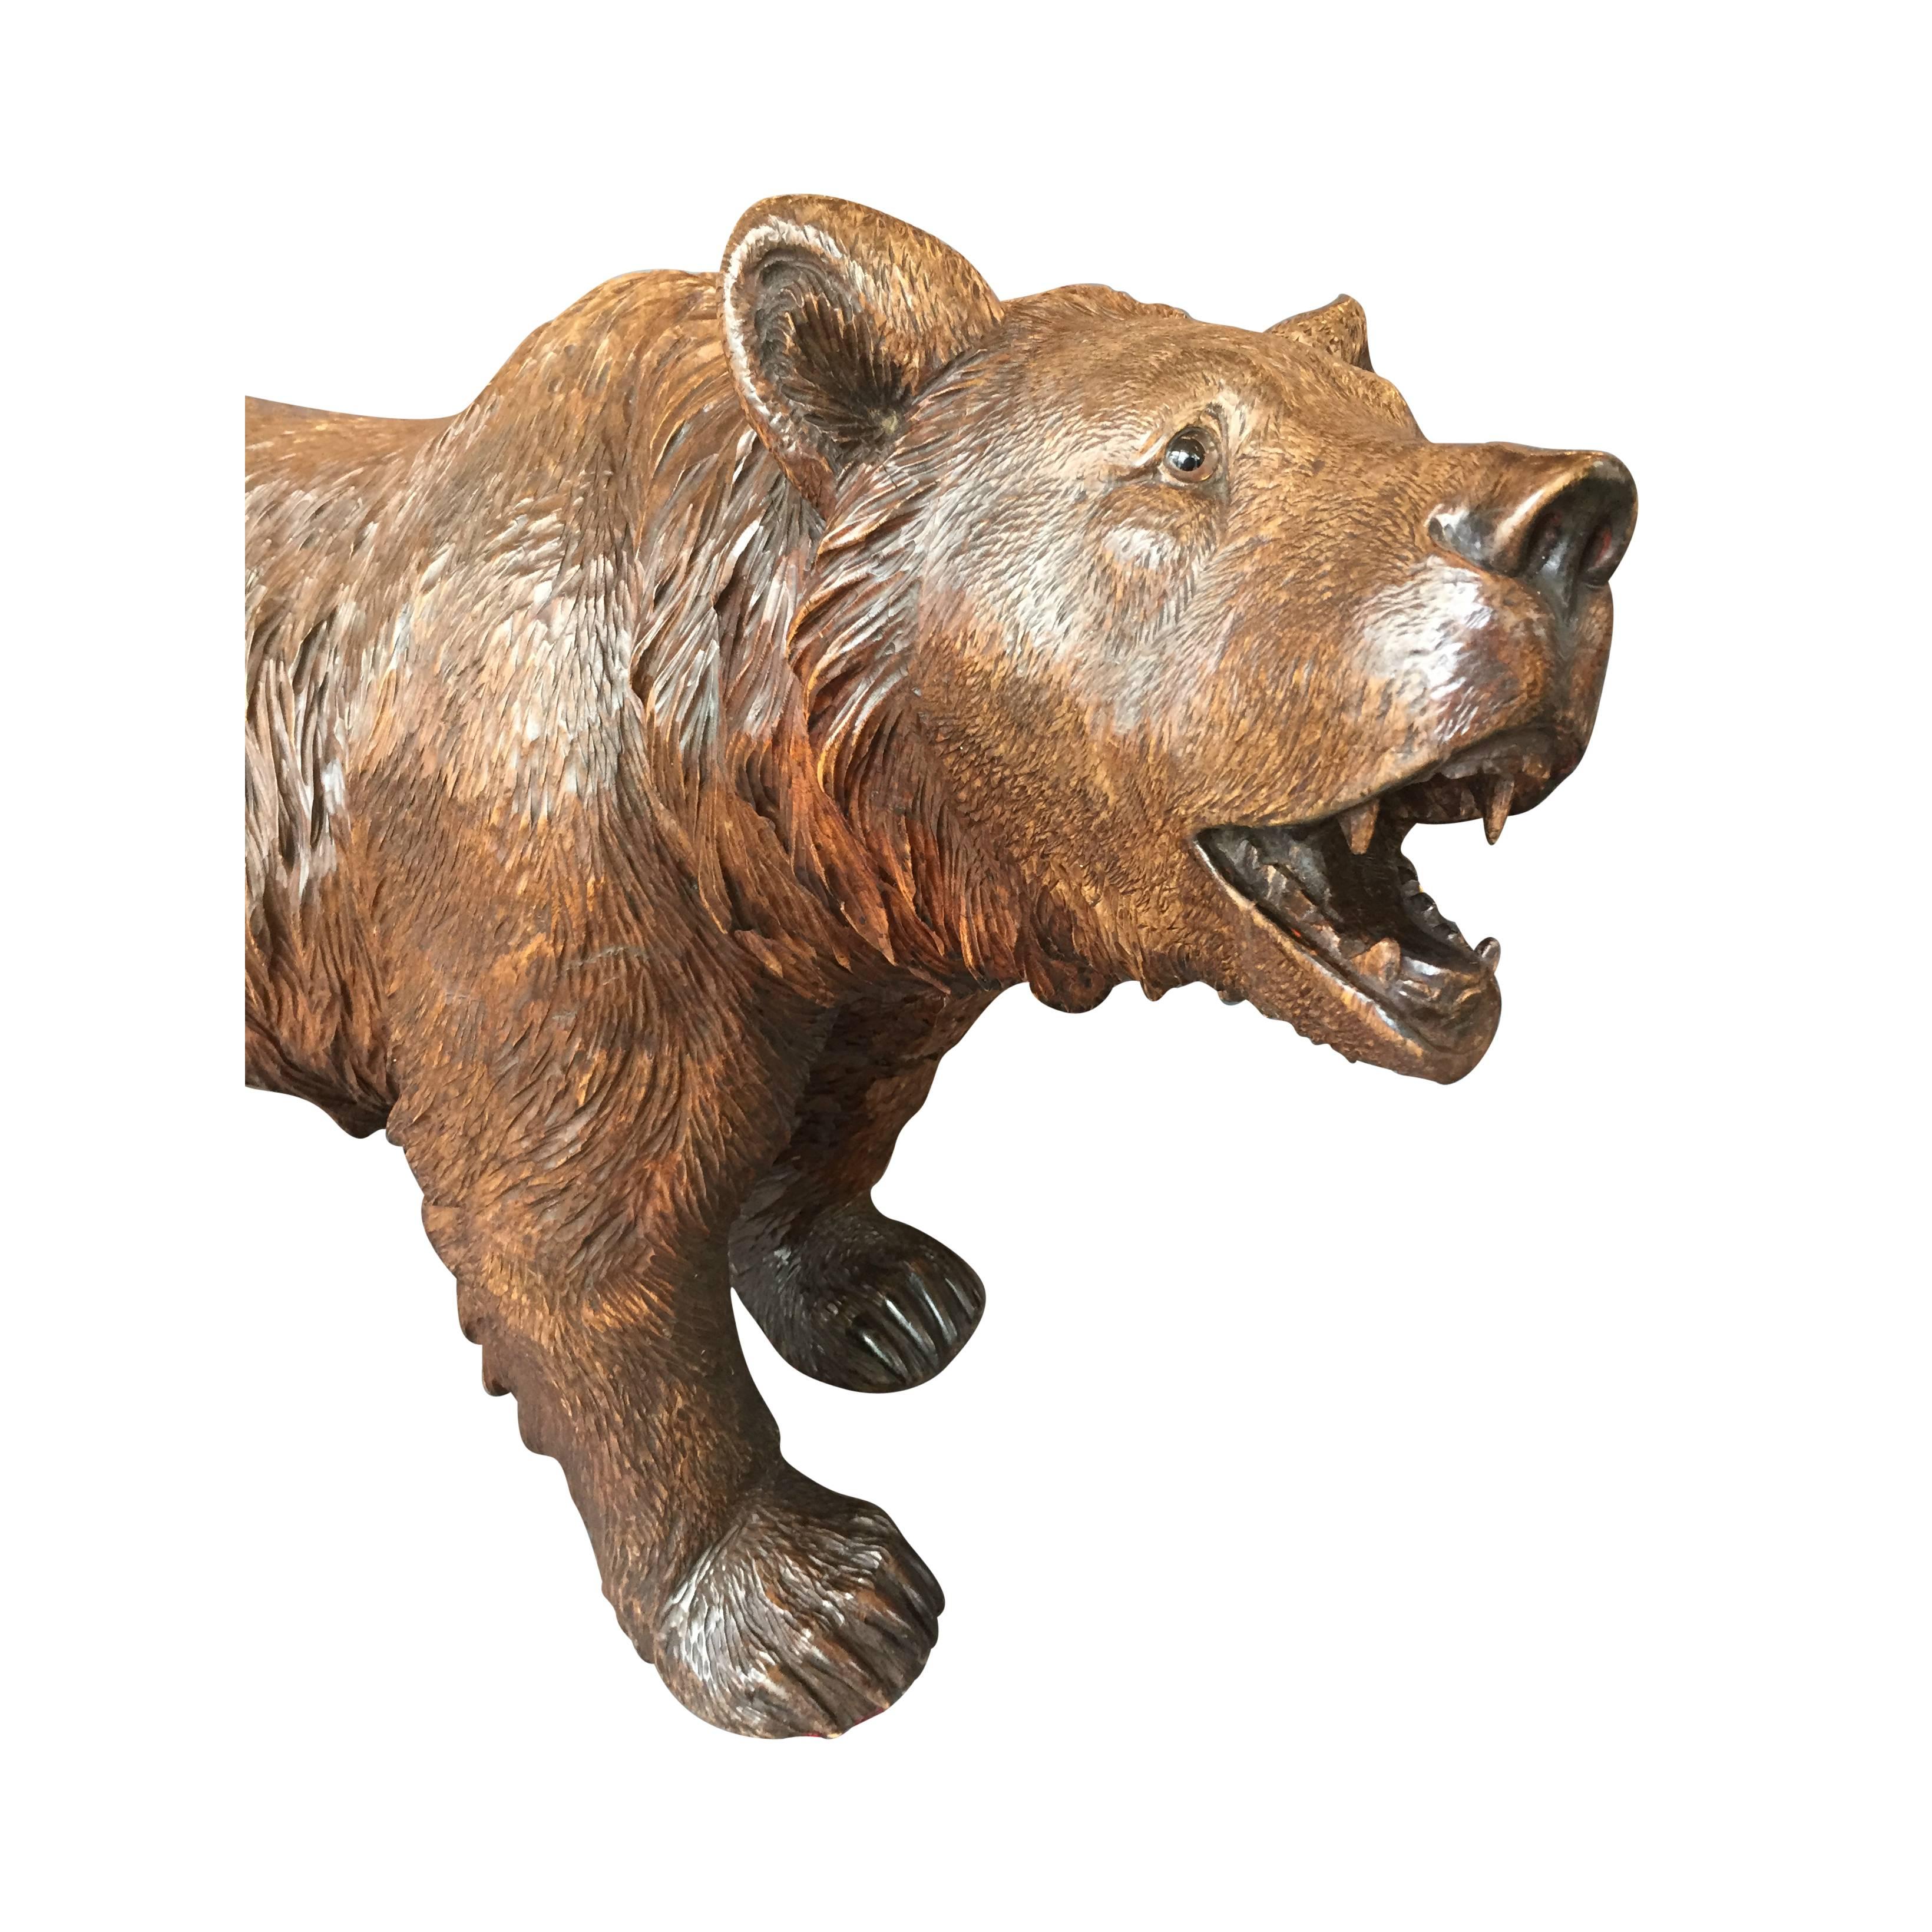 This is a magnificent Swiss Black Forest carved bear from the late 19th century. This large bear has glass eyes, a technique employed by some of the most skilled carvers. The fur is finely detailed and creates a movement to the piece.

This